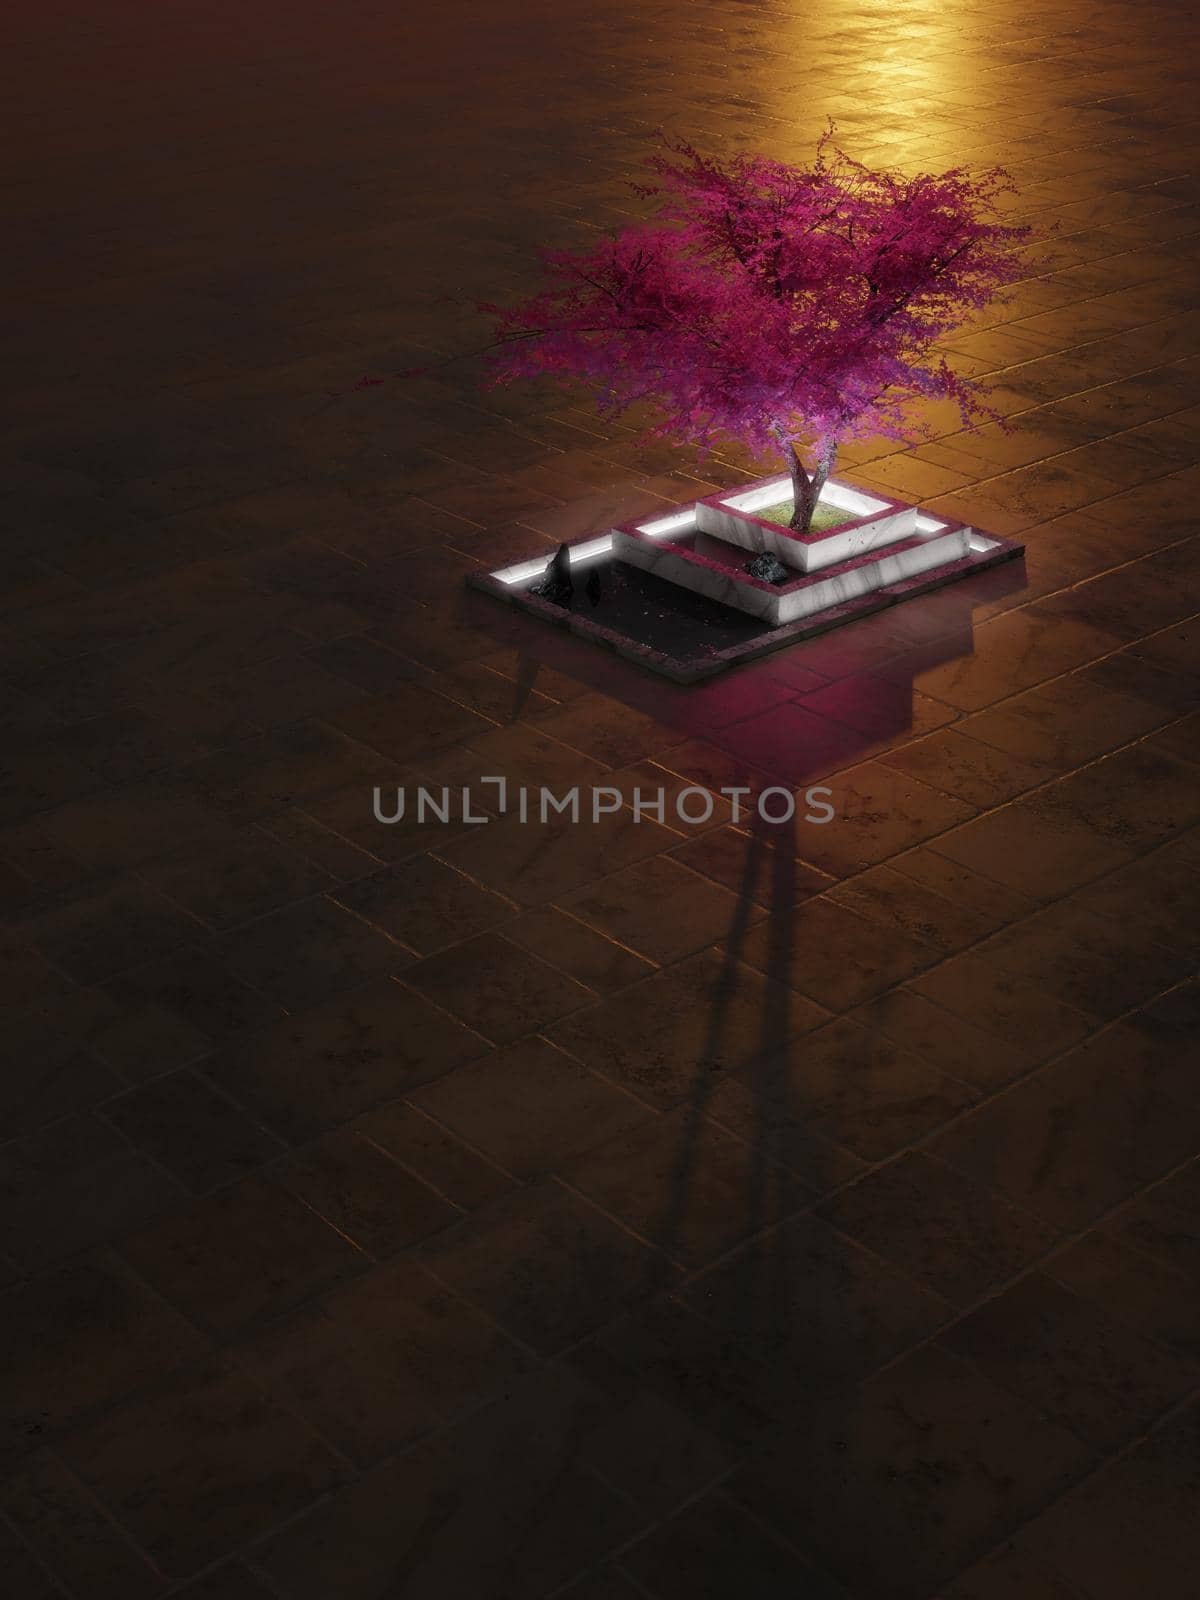 Purple tree in a zen-like marble bed with fallen petals at sunset. Fantasy background with large negative space. Digital render.